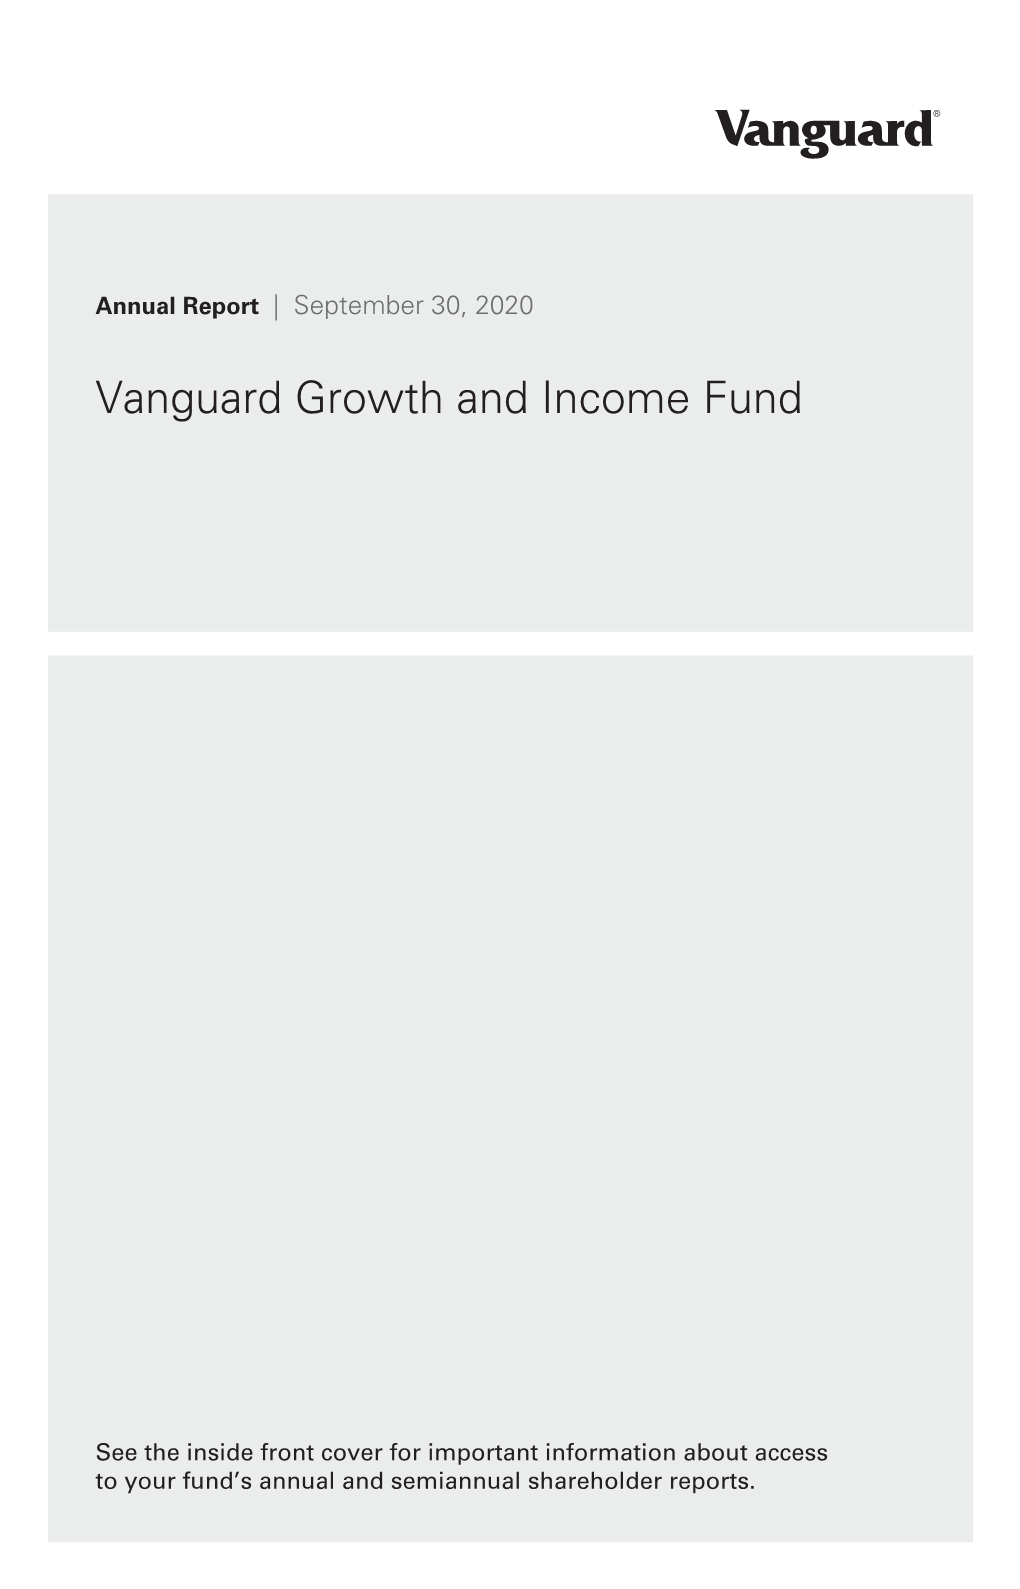 Vanguard Growth and Income Fund Annual Report September 30, 2020